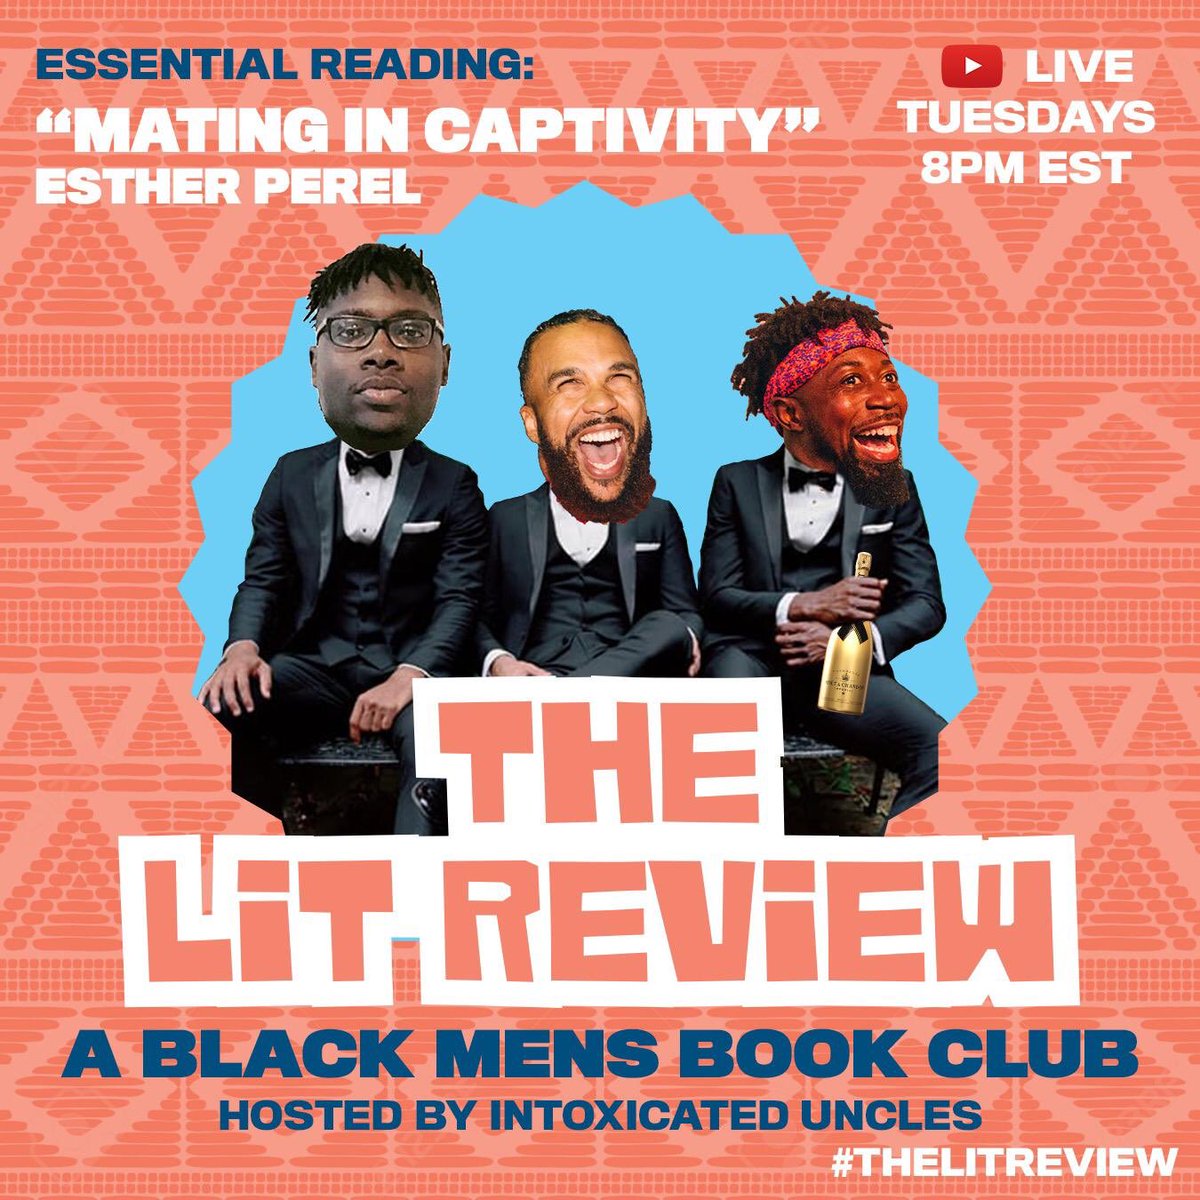 Fam, we’re back this Tuesday at 8pm EST with another episode of @LitReviewLive, with my Bredren @YusufYuie @Jidenna. This week we’re chopping it up over “Mating In Captivity” by Esther Perel. Pull up! #TheLitReview #LitReviewLive